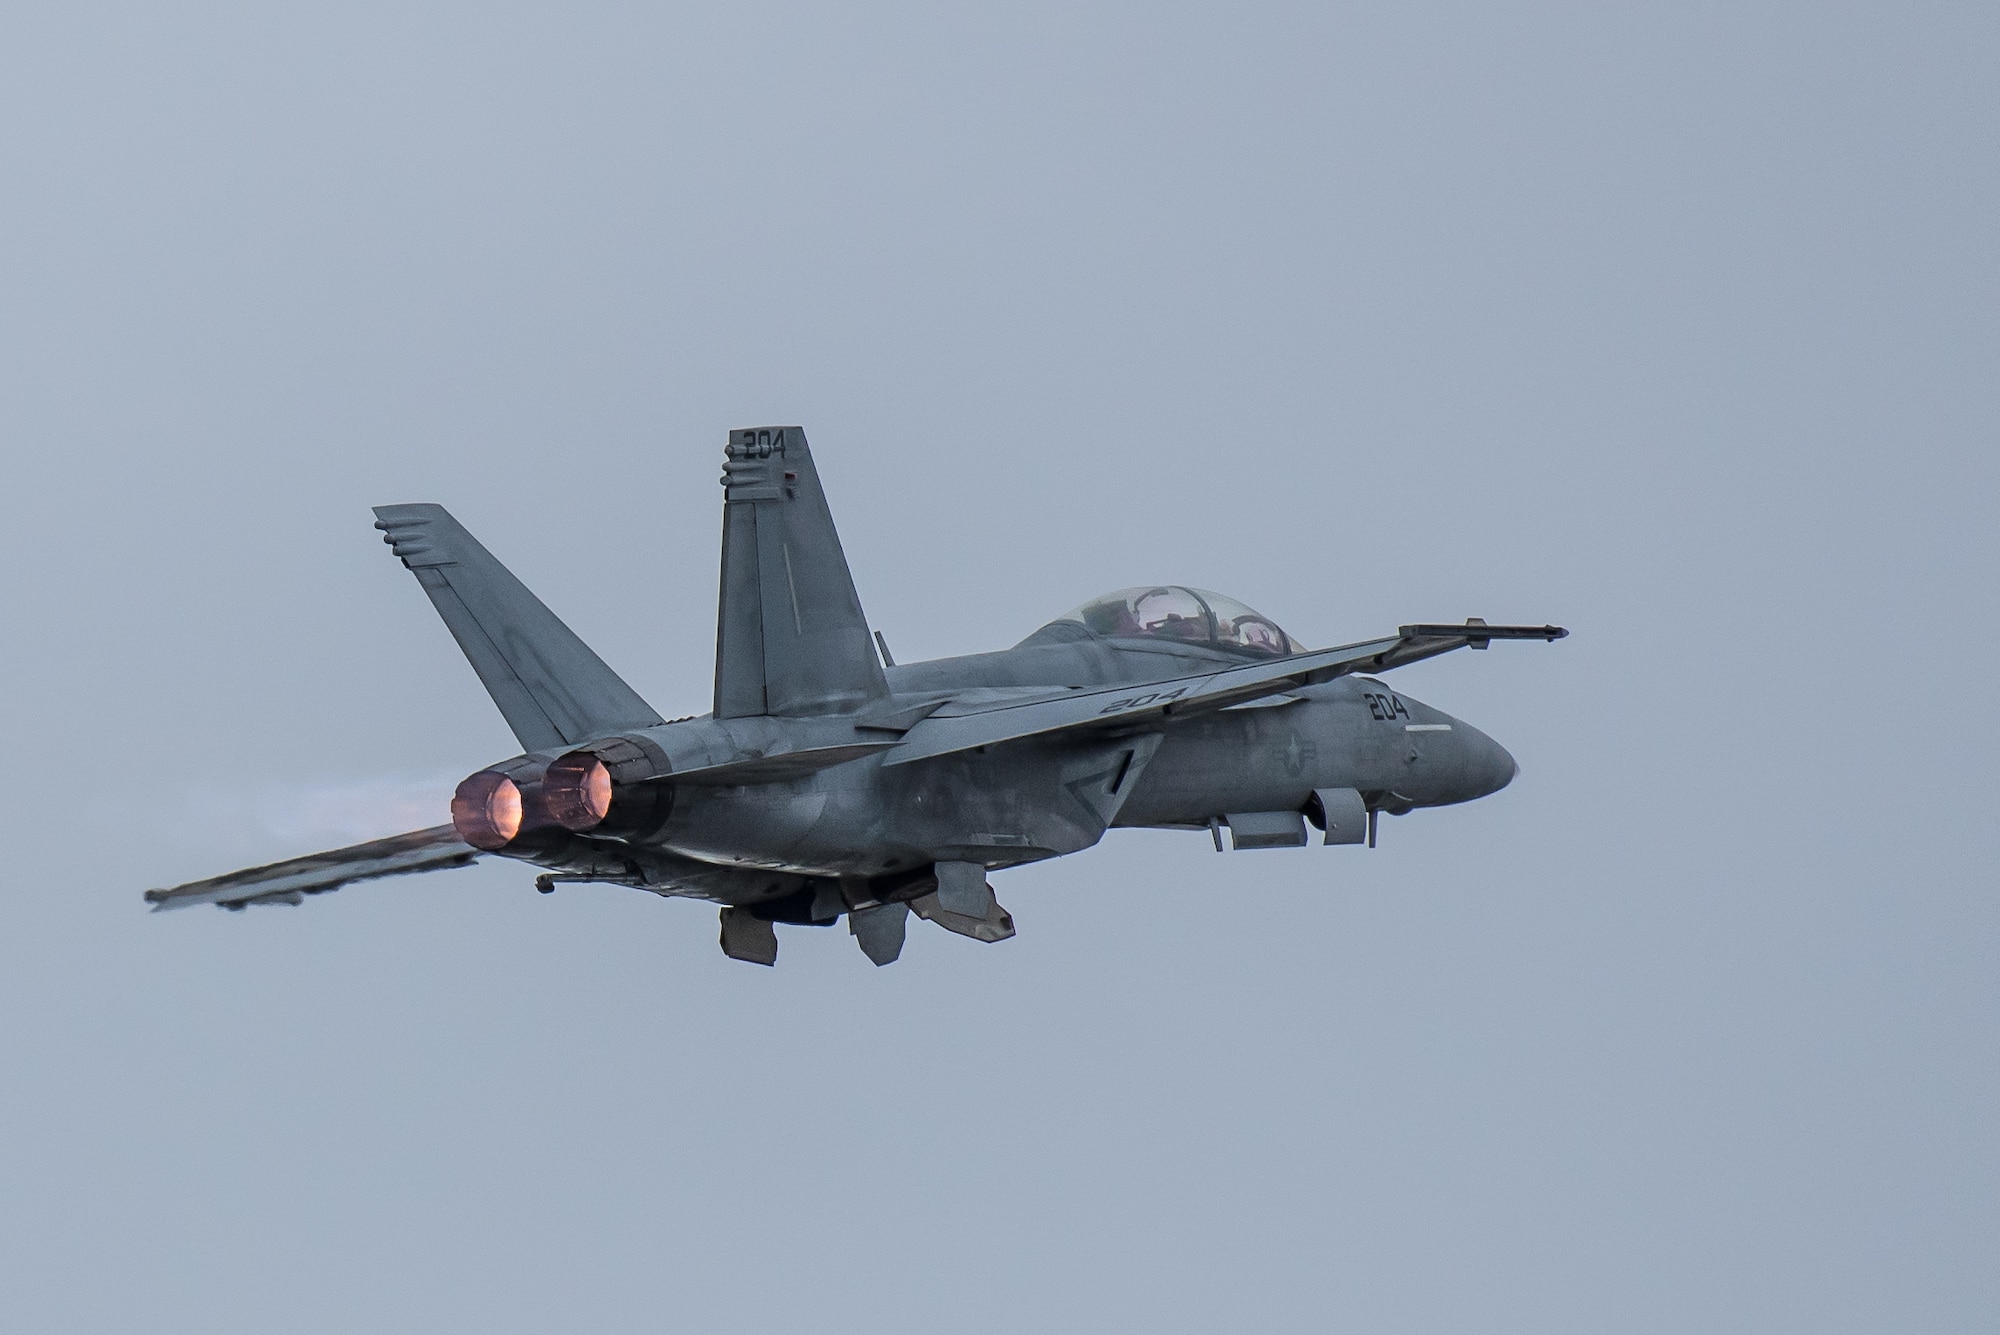 An F/A-18 Super Hornet from the U.S. Navy’s Tactical Demonstration Team, Strike Fighter Squadron 106, Naval Air Station Oceana, Va., streaks over the Ohio River during the Thunder Over Louisville airshow in Louisville, Ky., April 13, 2019. The Kentucky Air National Guard once again served as the base of operations for military aircraft participating in the annual event, which has grown to become one of the largest single-day air shows in North America. (U.S. Air National Guard photo by Dale Greer)